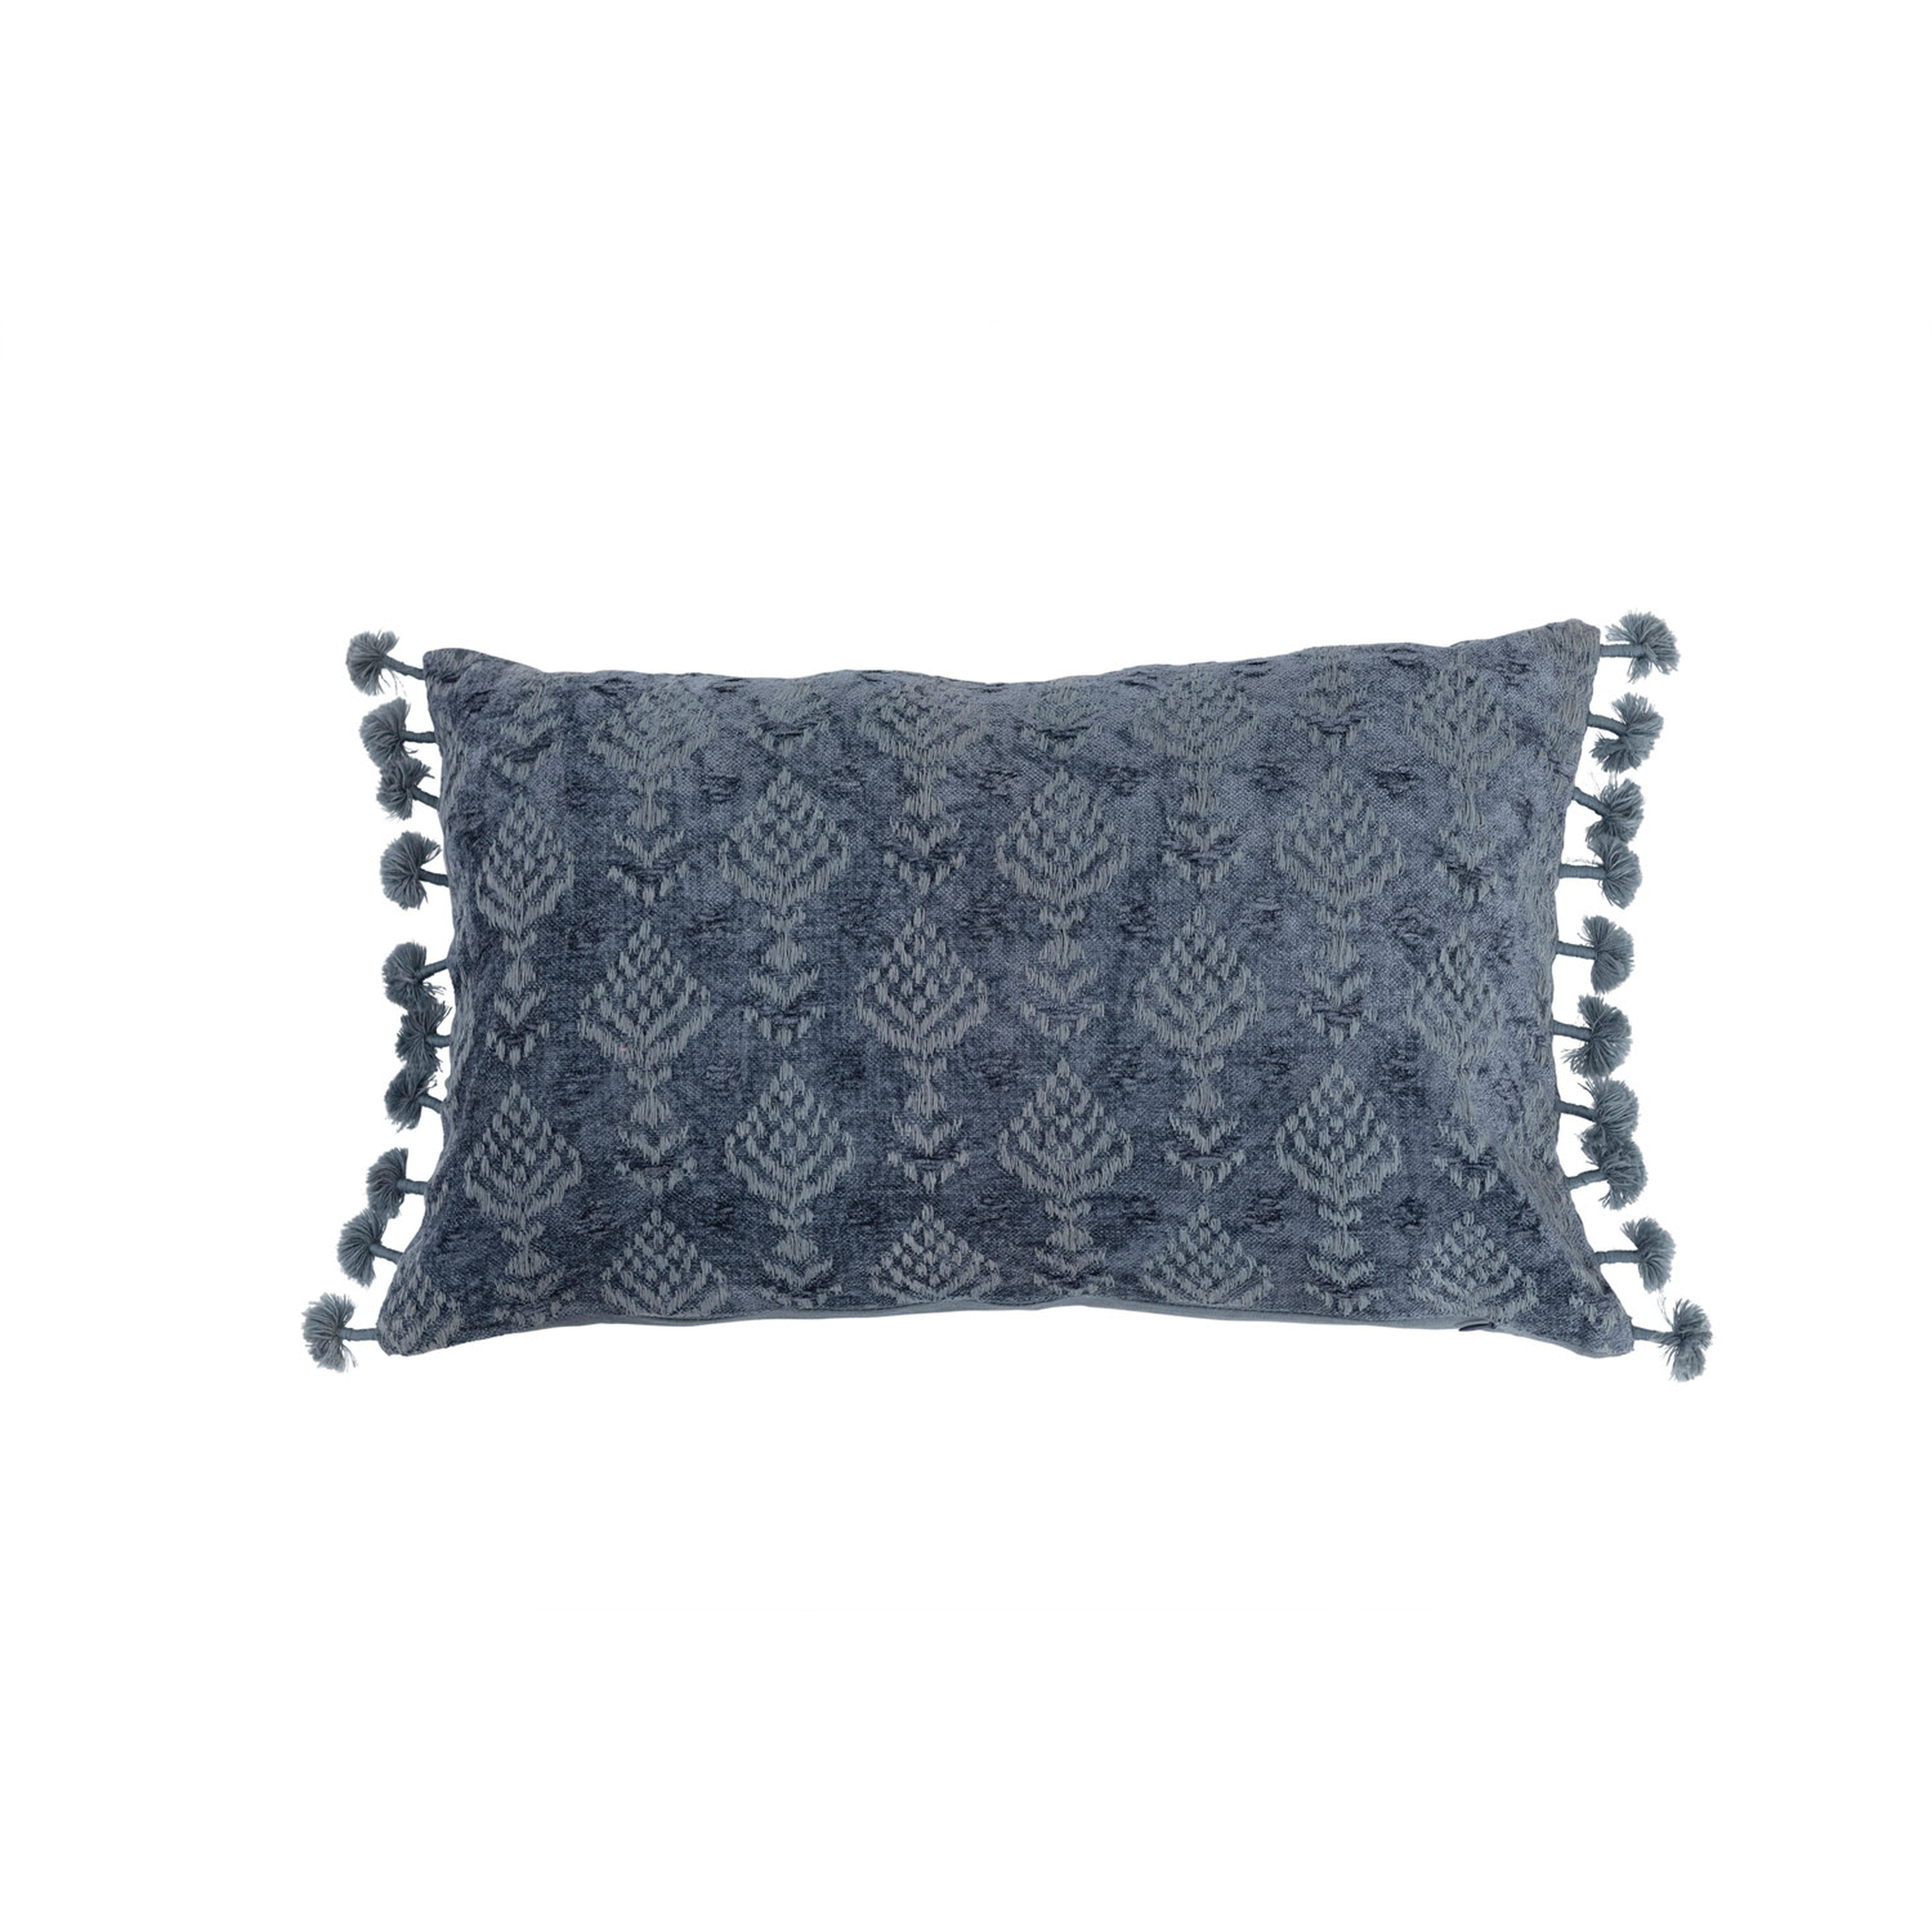 Cotton Chenille Lumbar Pillow with Embroidery and Tassels - Nomad Home